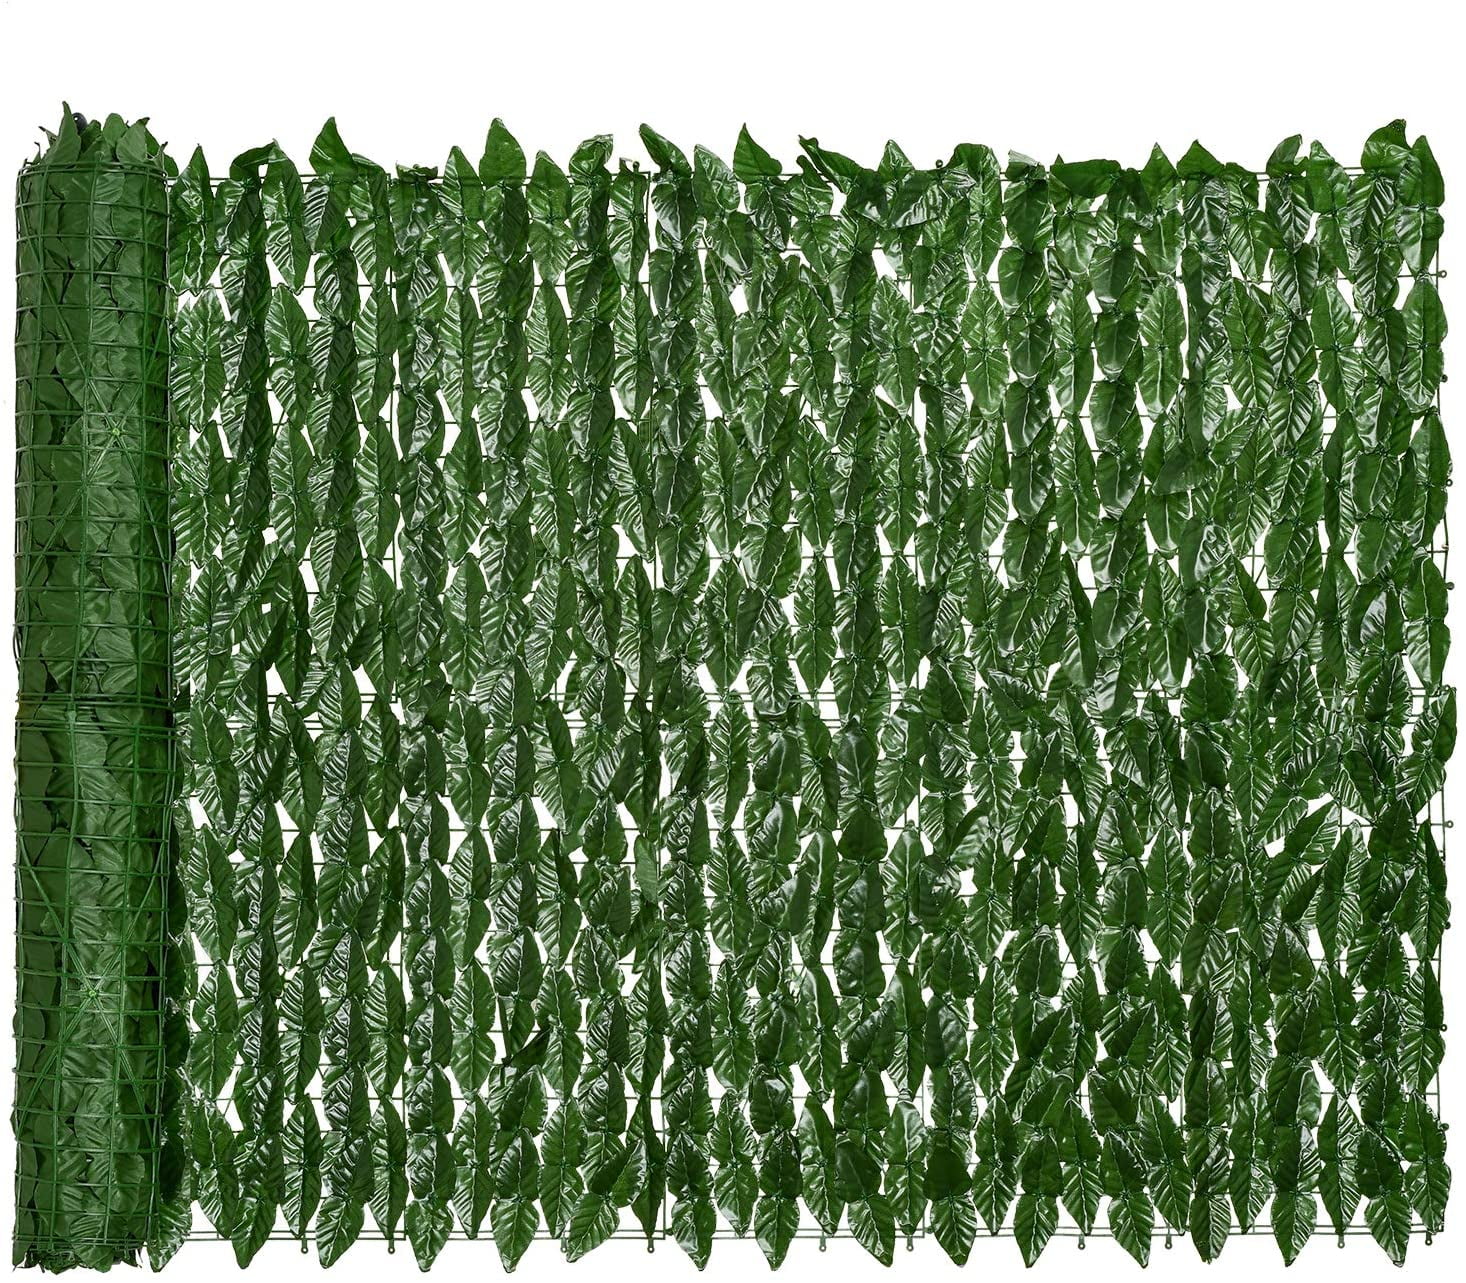 Artificial English Ivy Roll Privacy Screening Hedging Wall Garden Fence Balcony 